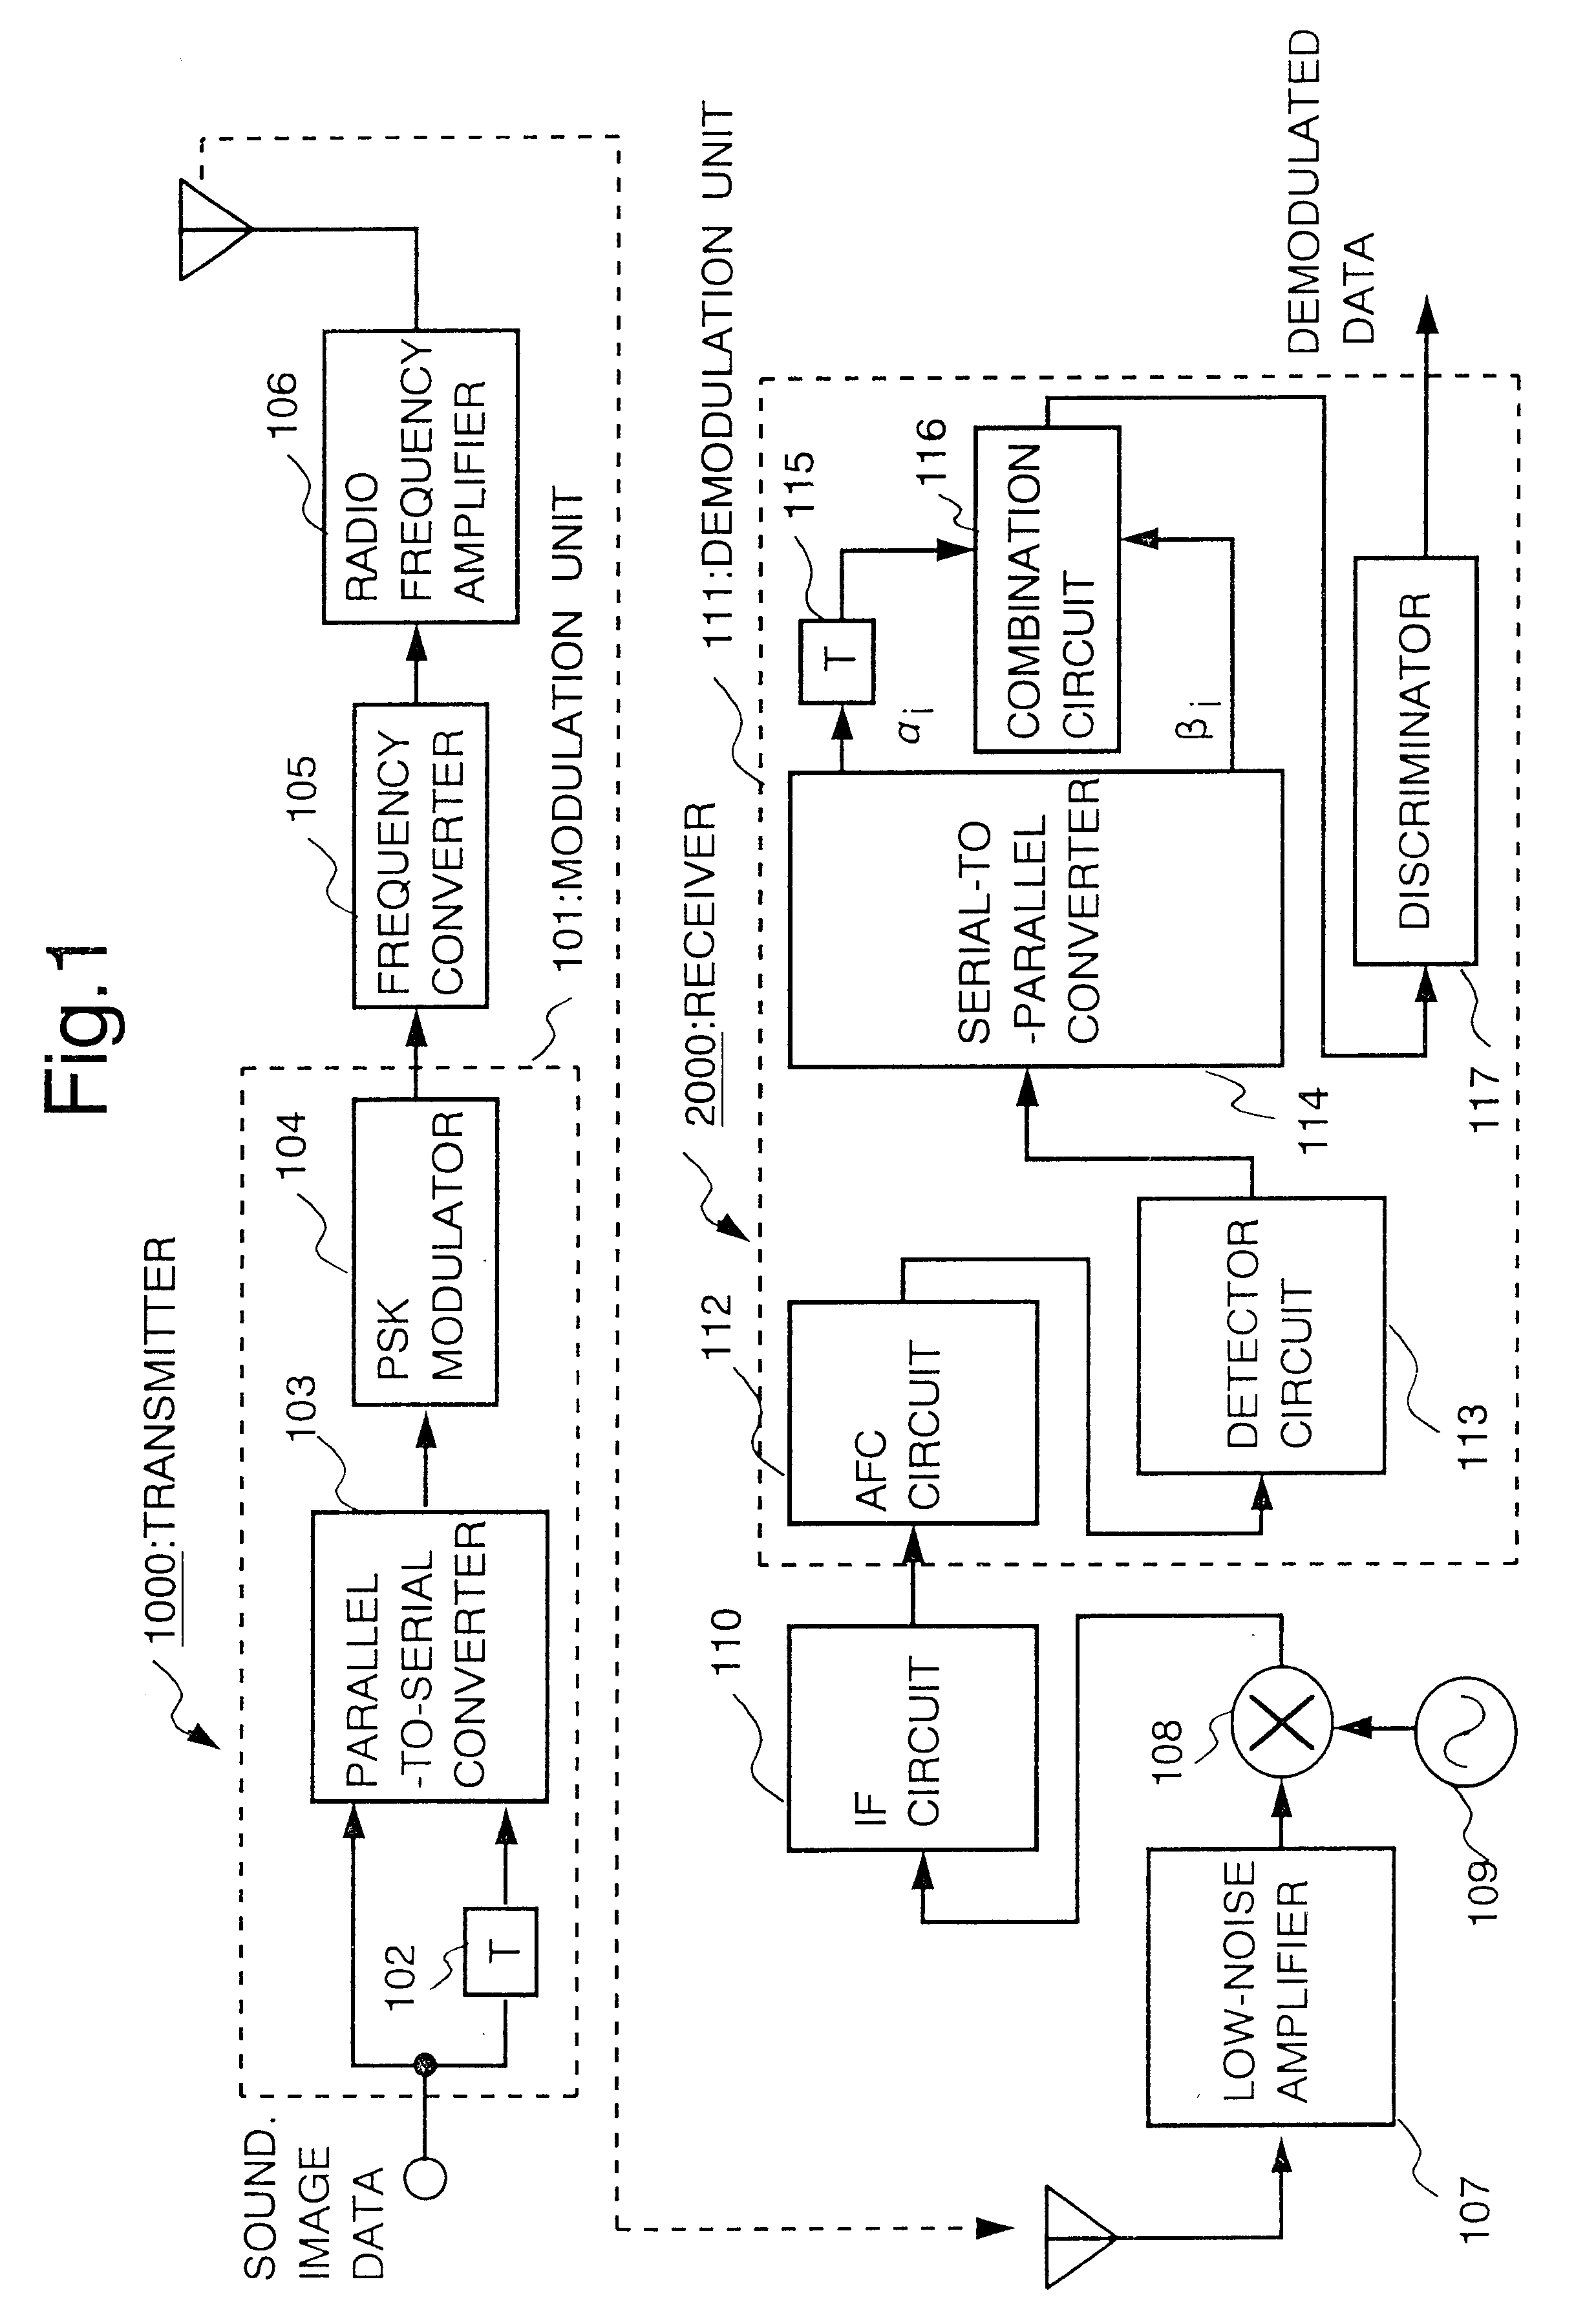 Automatic frequency control communication system